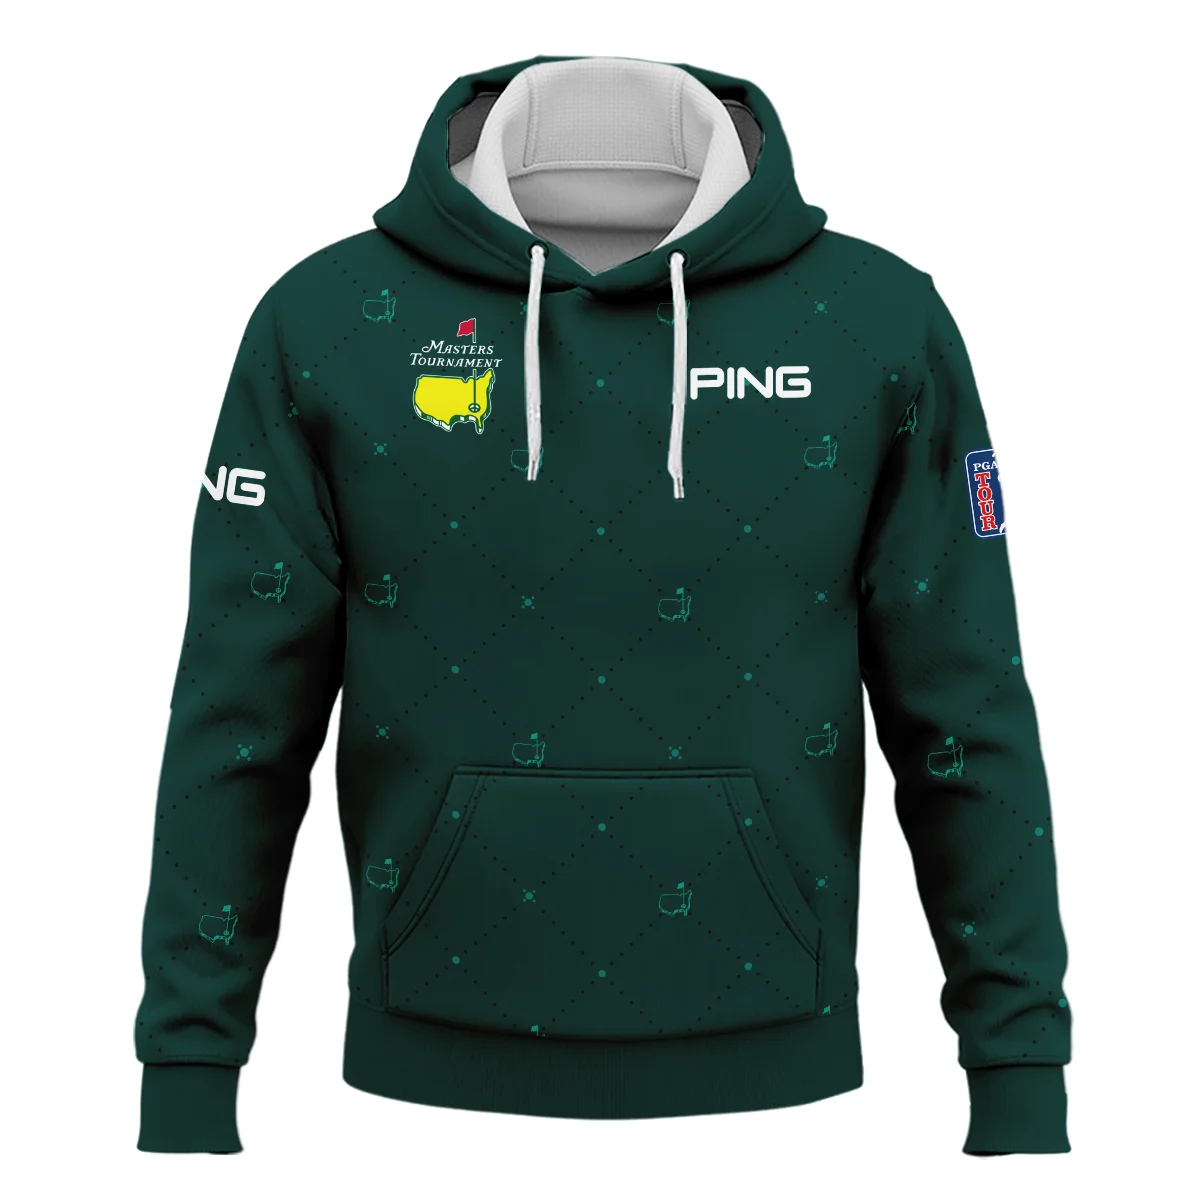 Dark Green Pattern In Retro Style With Logo Masters Tournament Ping Hoodie Shirt Style Classic Hoodie Shirt